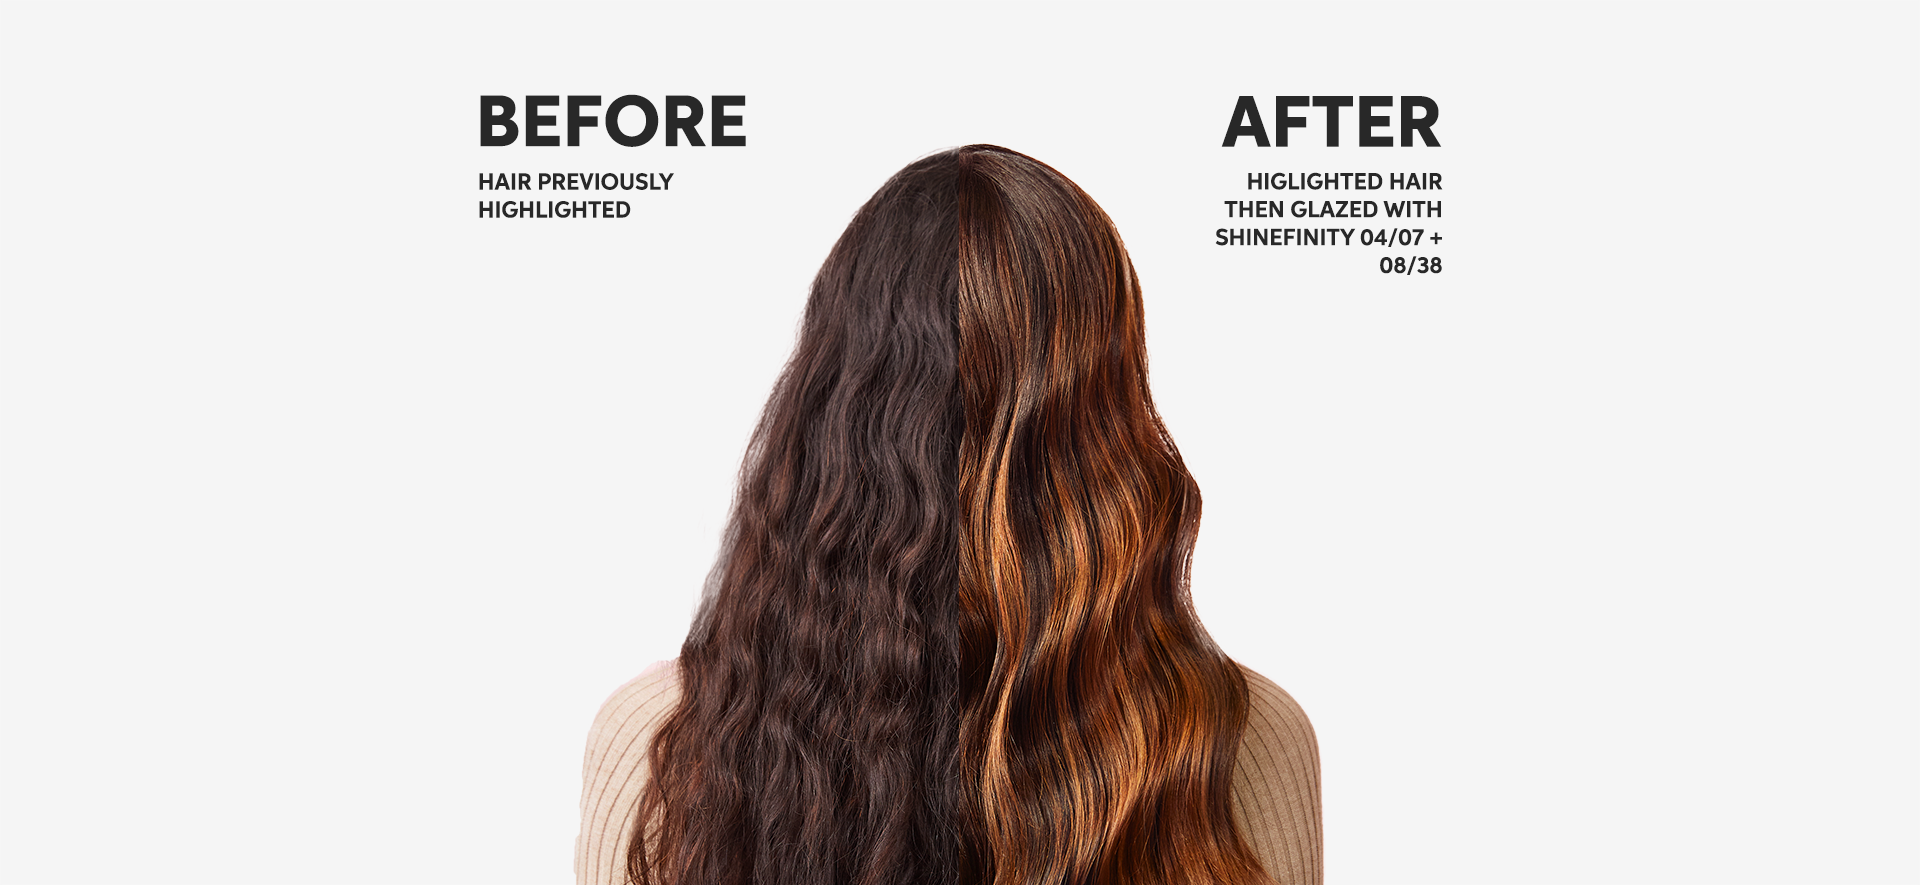 SHINEFINITY FOR HEALTHY-LOOKING SHINE AND A SILKY HAIR FEEL​